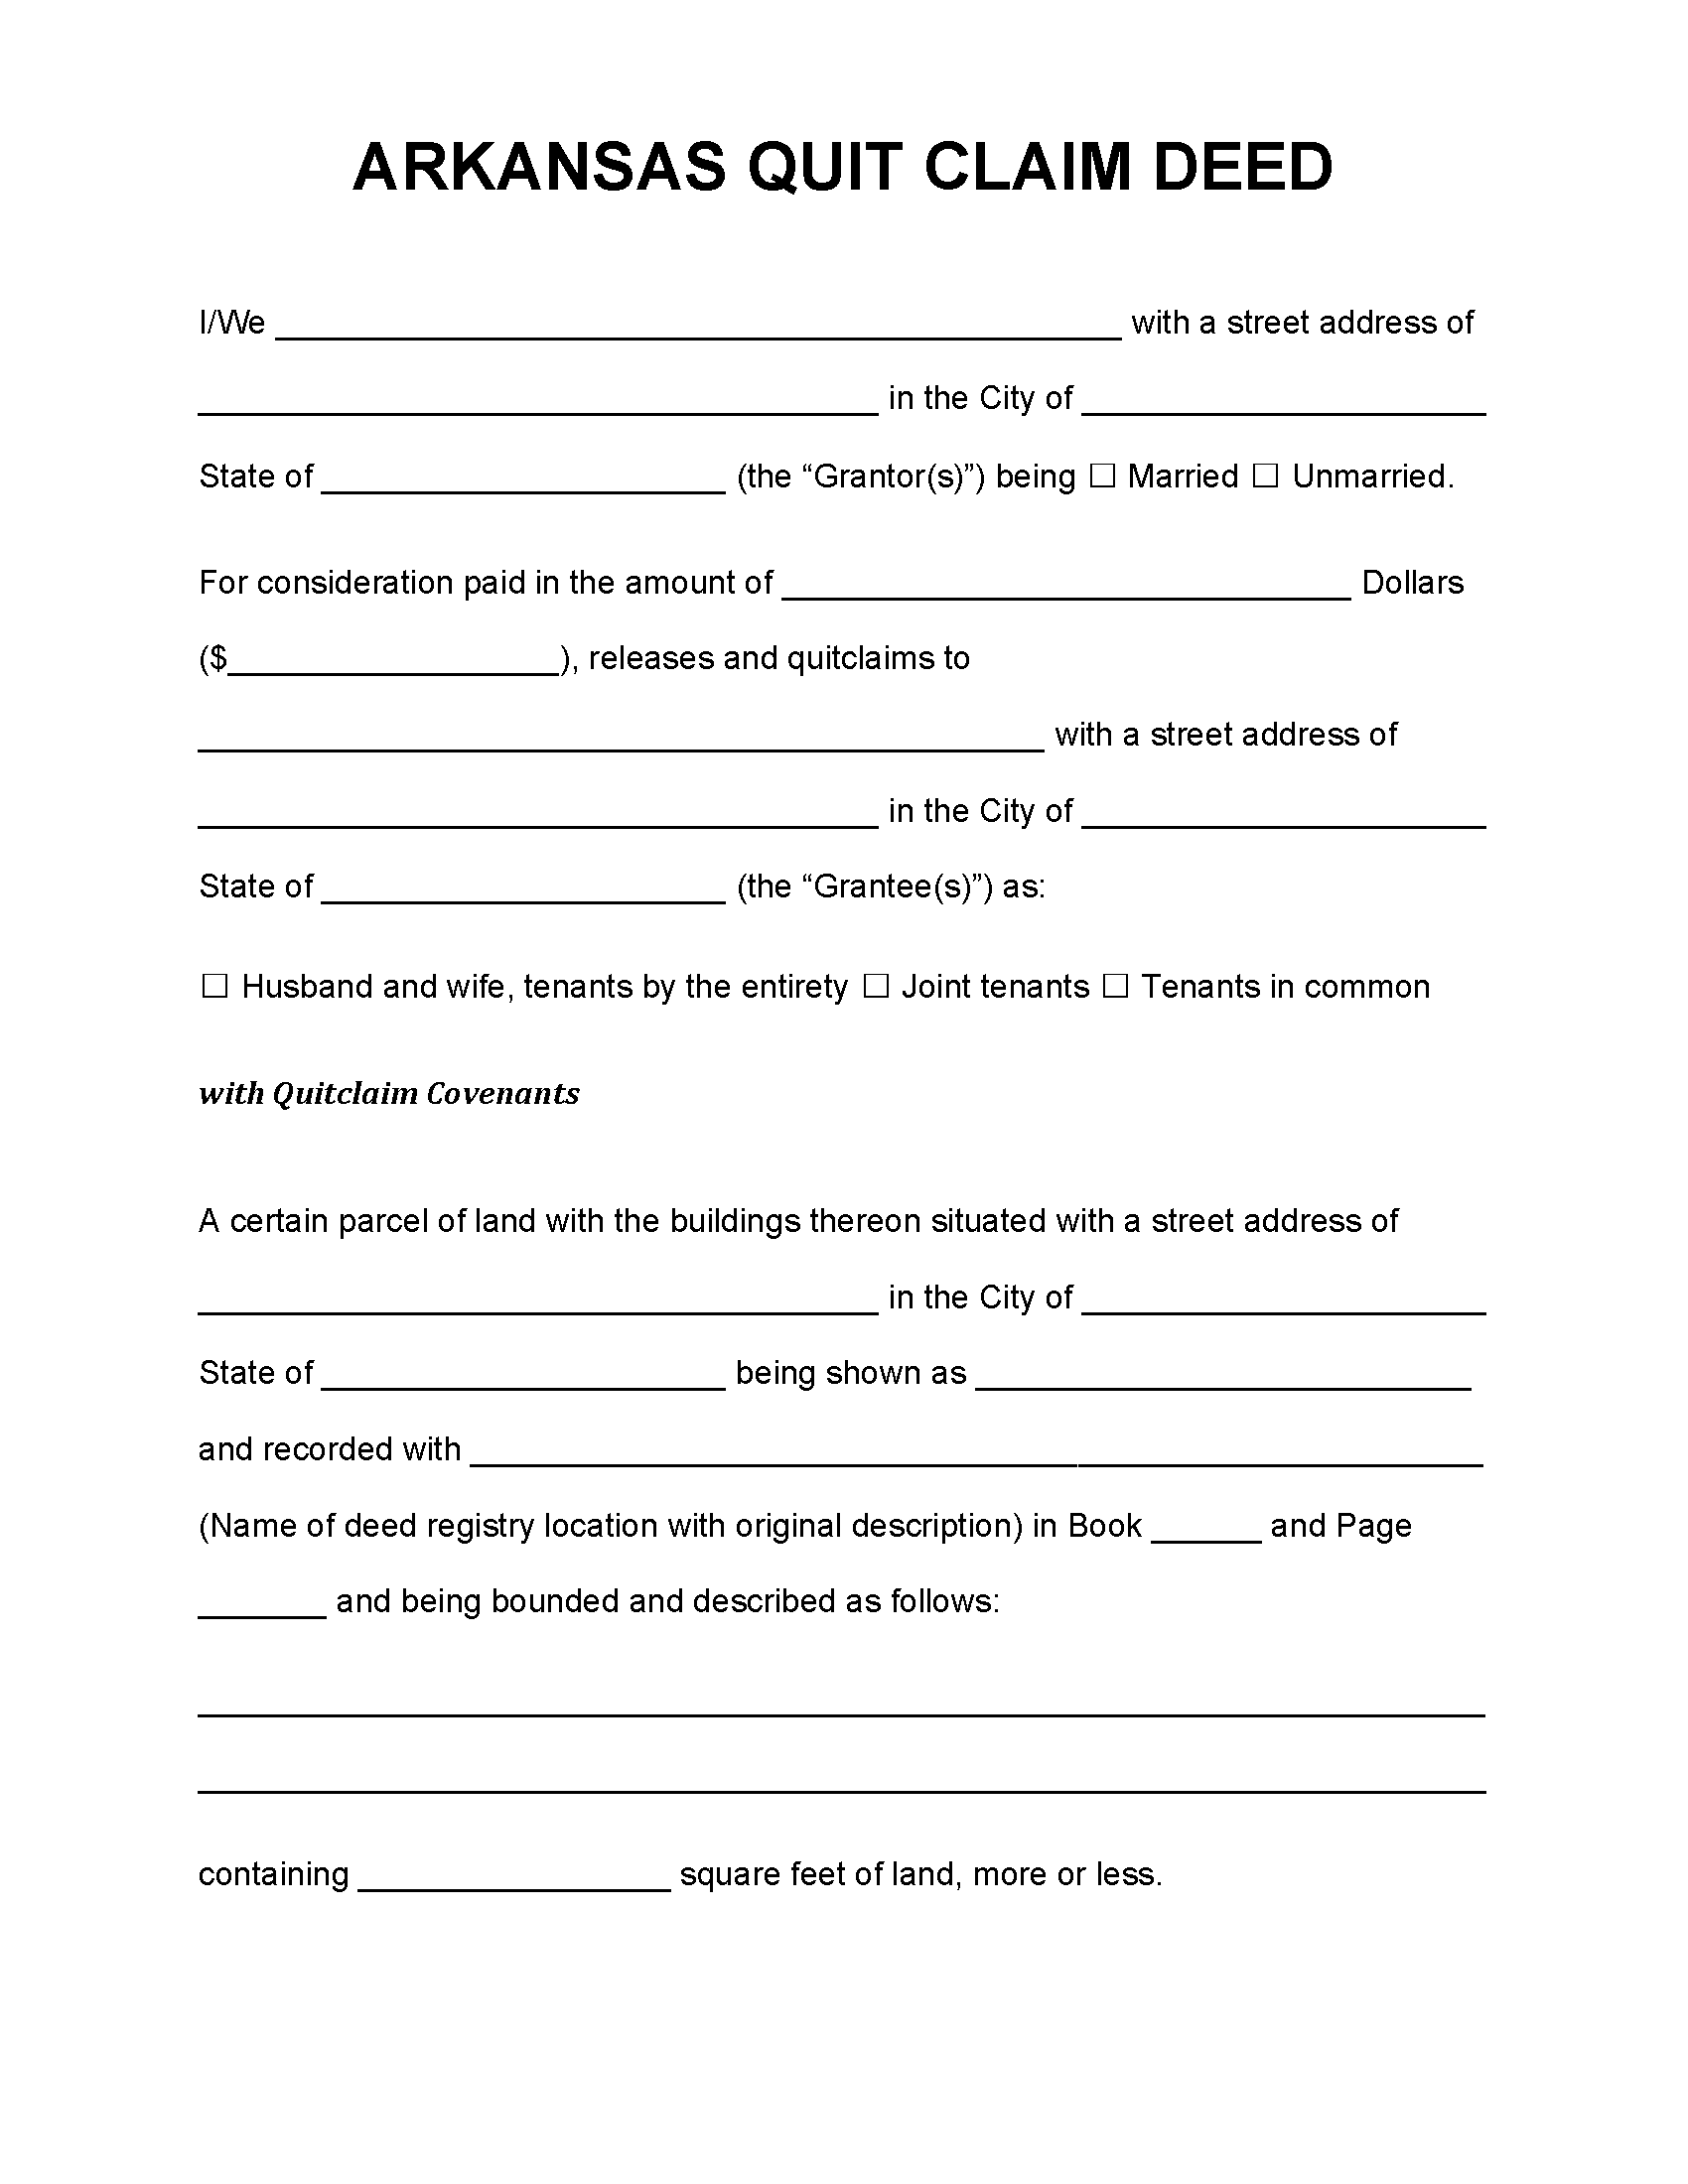 arkansas-quit-claim-deed-free-printable-legal-forms